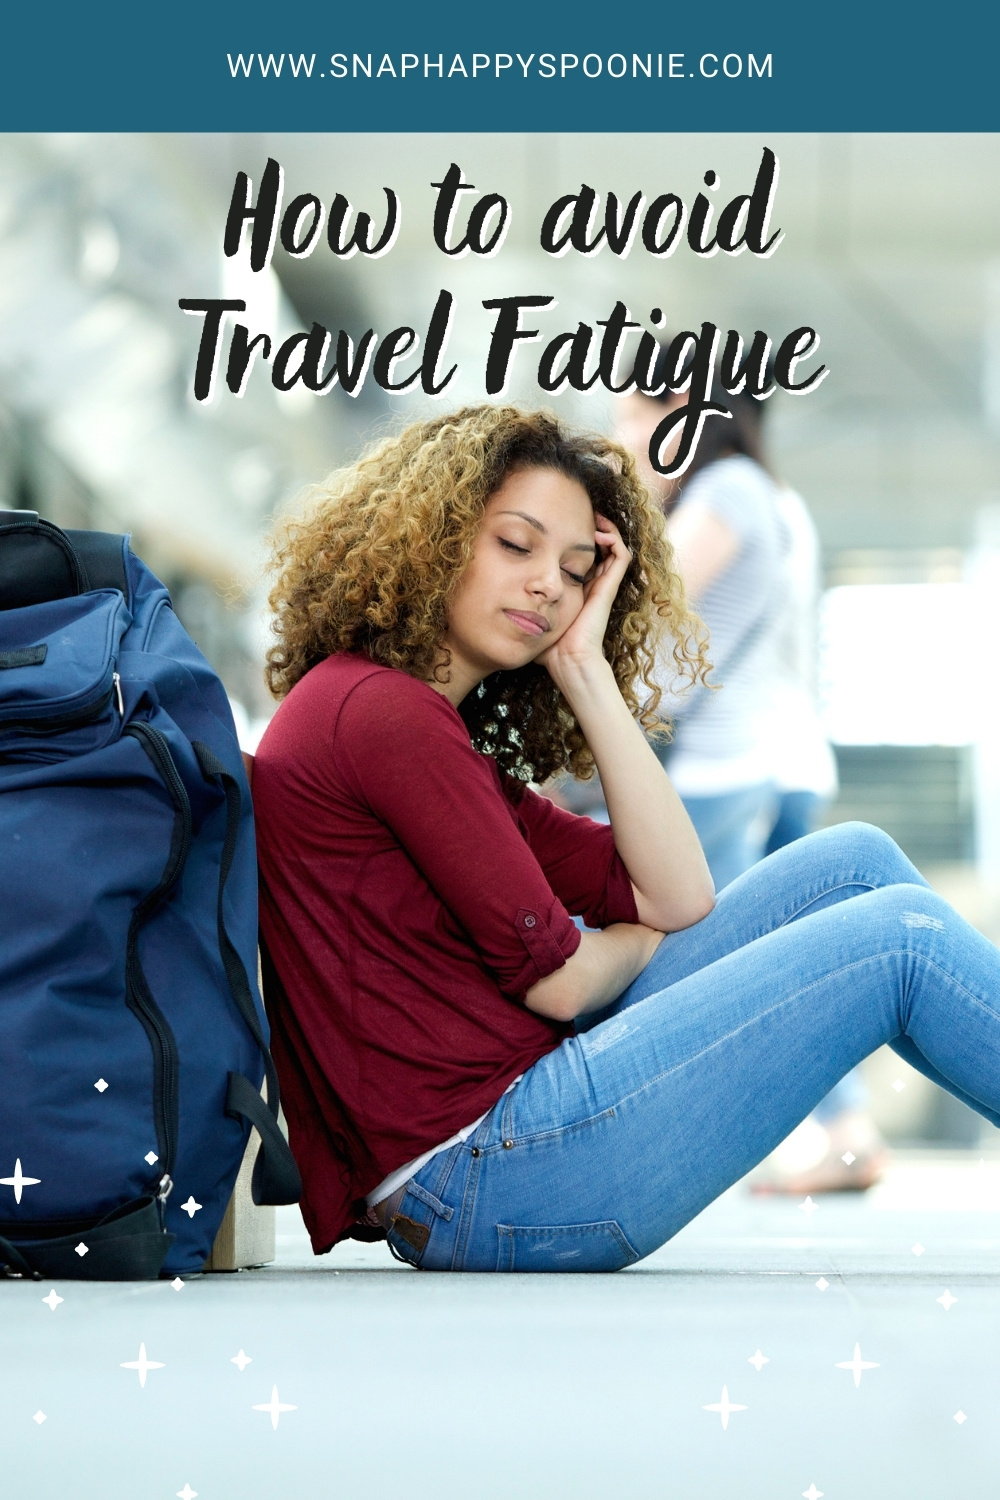 travel fatigue meaning